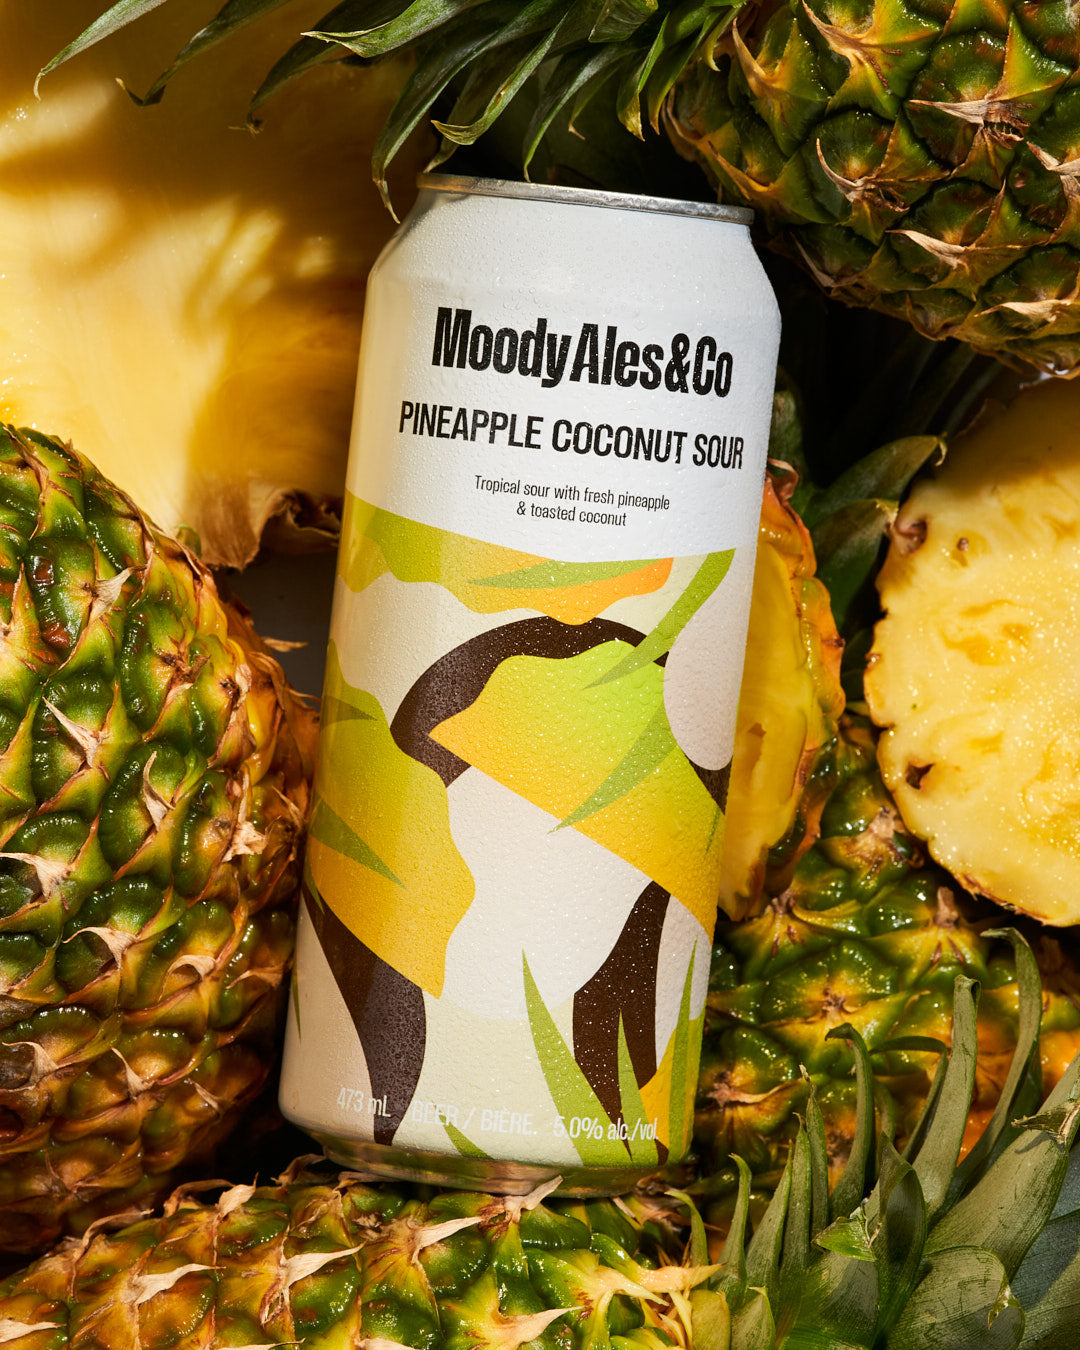 pineapple coconut sour can amongst pineapple